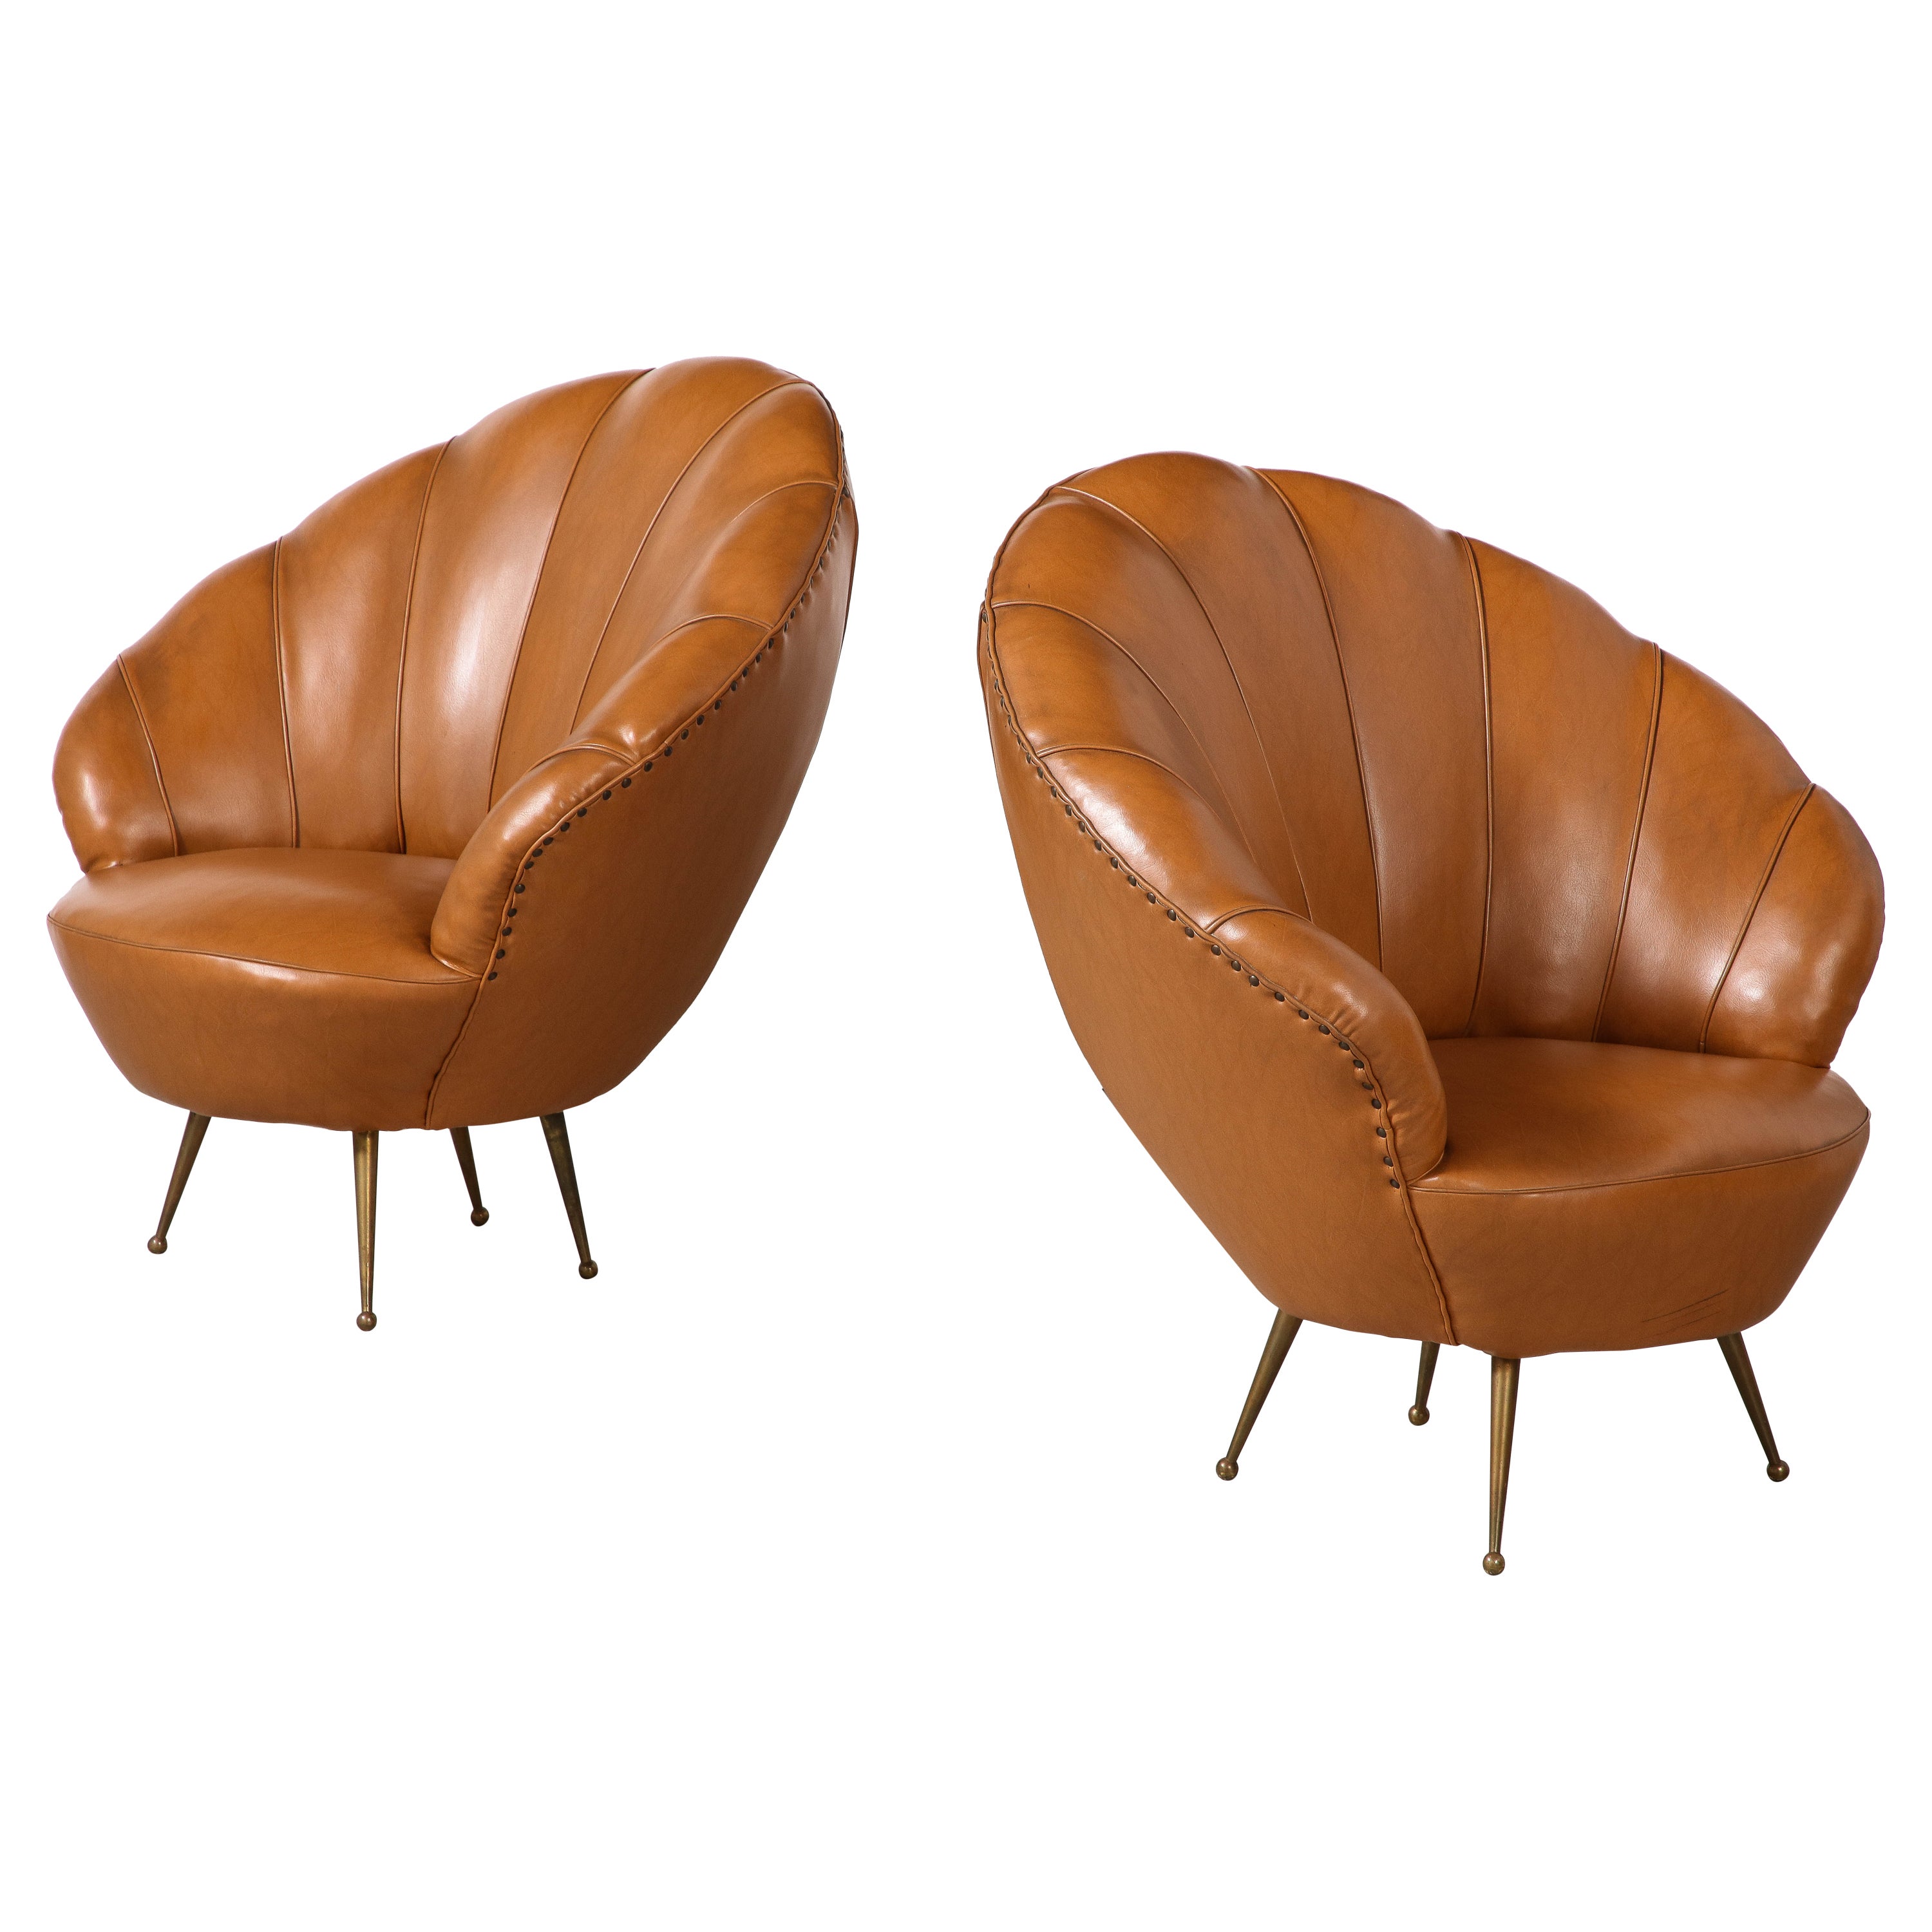 Pair of Italian Modernist Leather Scalloped Lounge Chairs, Circa 1950  For Sale